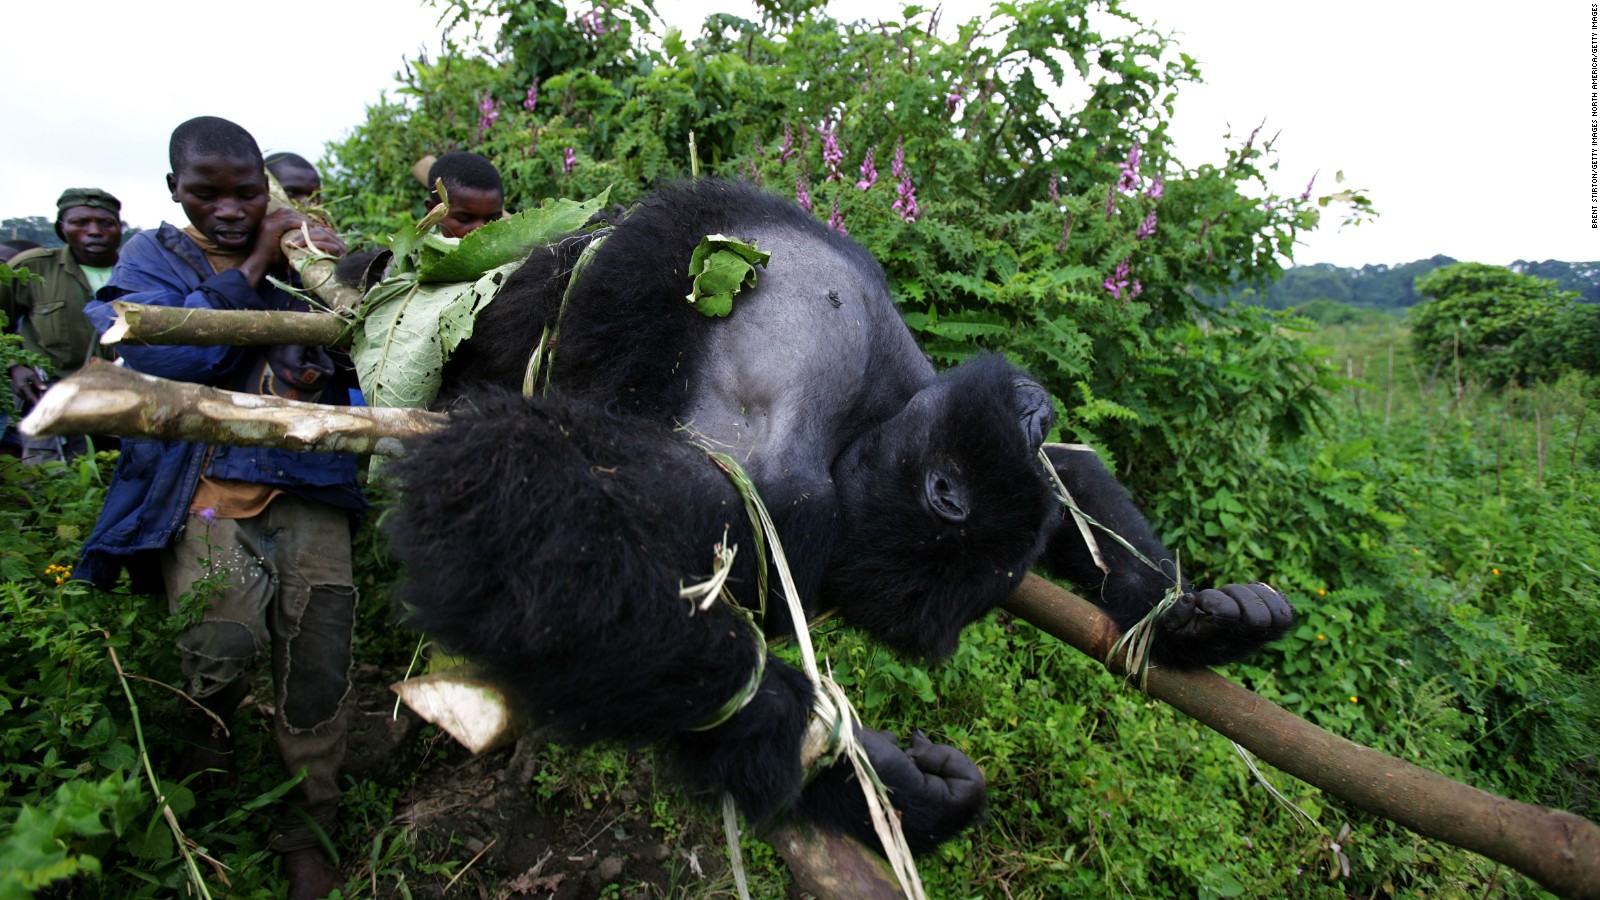 What are the biggest threats to mountain gorillas?